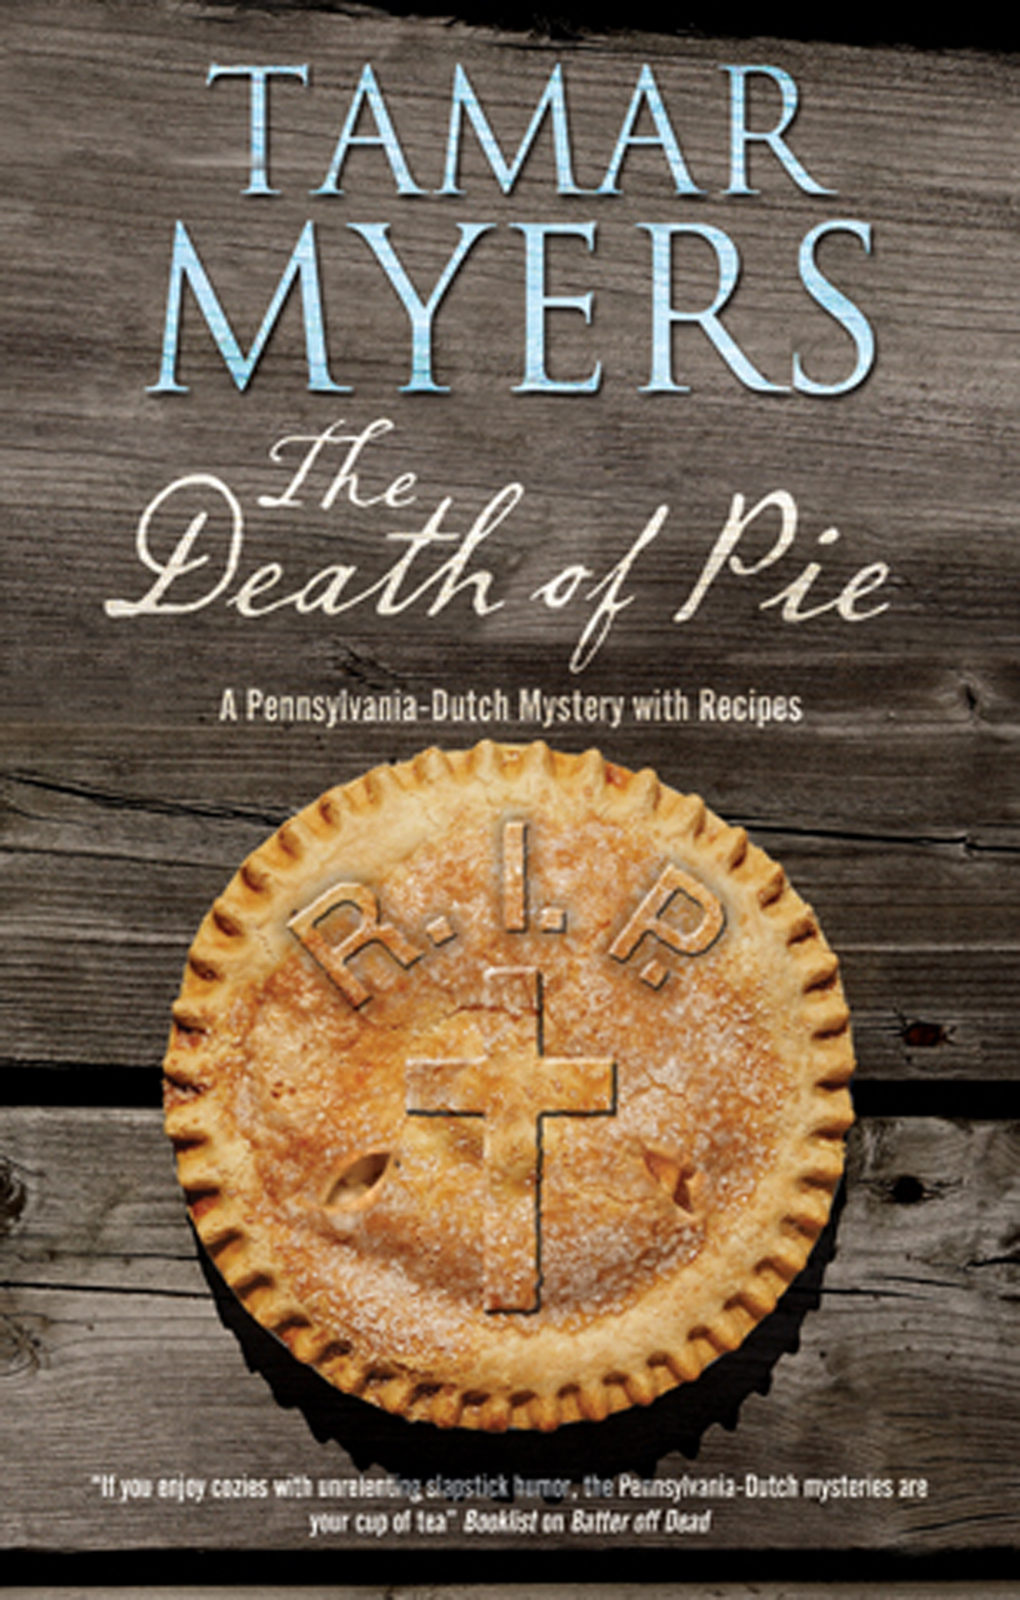 The Death of Pie (2014) by Tamar Myers